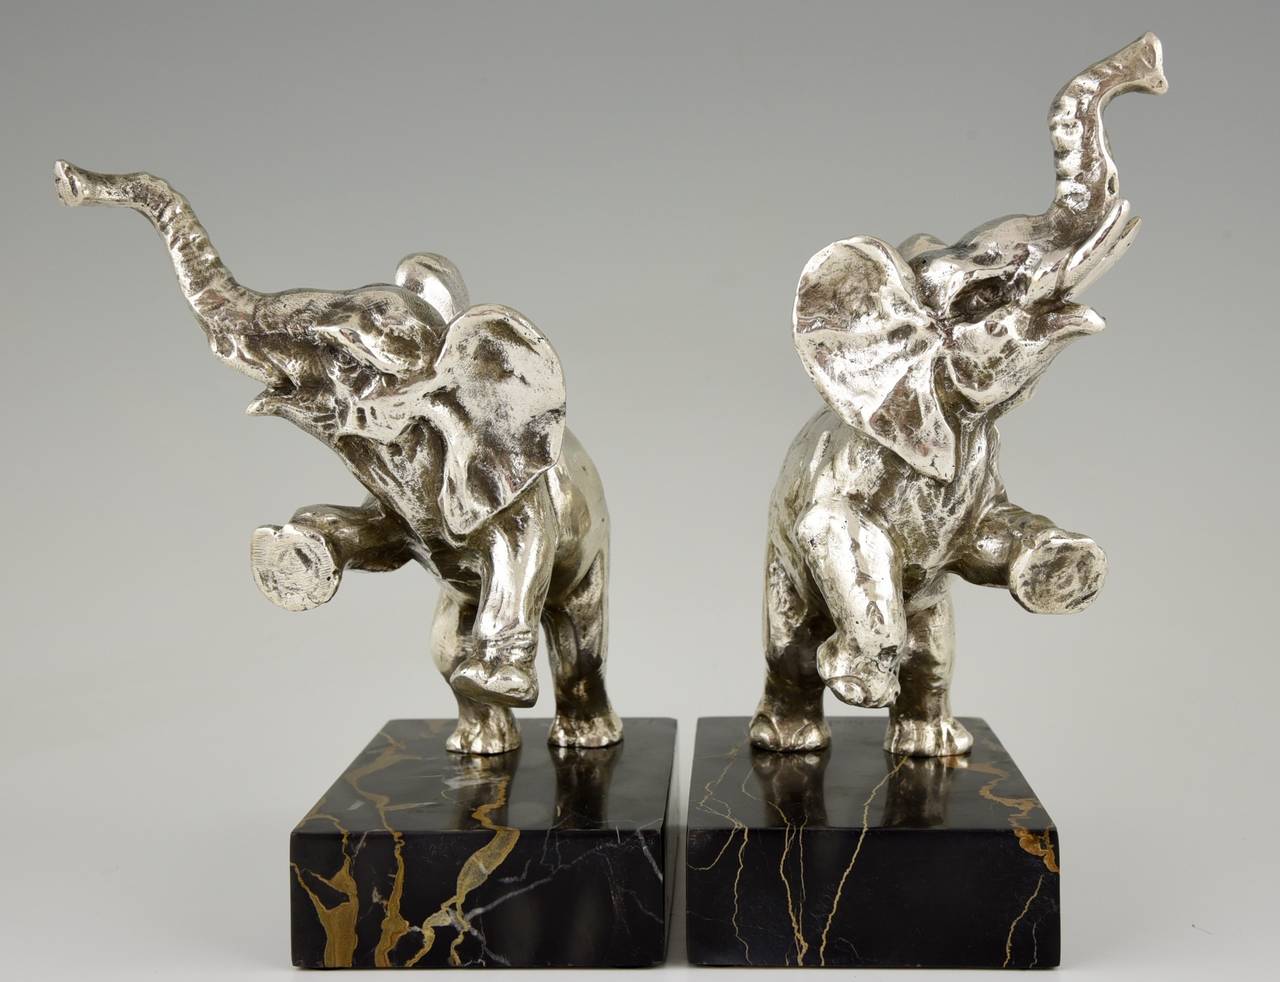 French Art Deco silvered Bronze Elephant Bookends by Fontinelle 1930 France